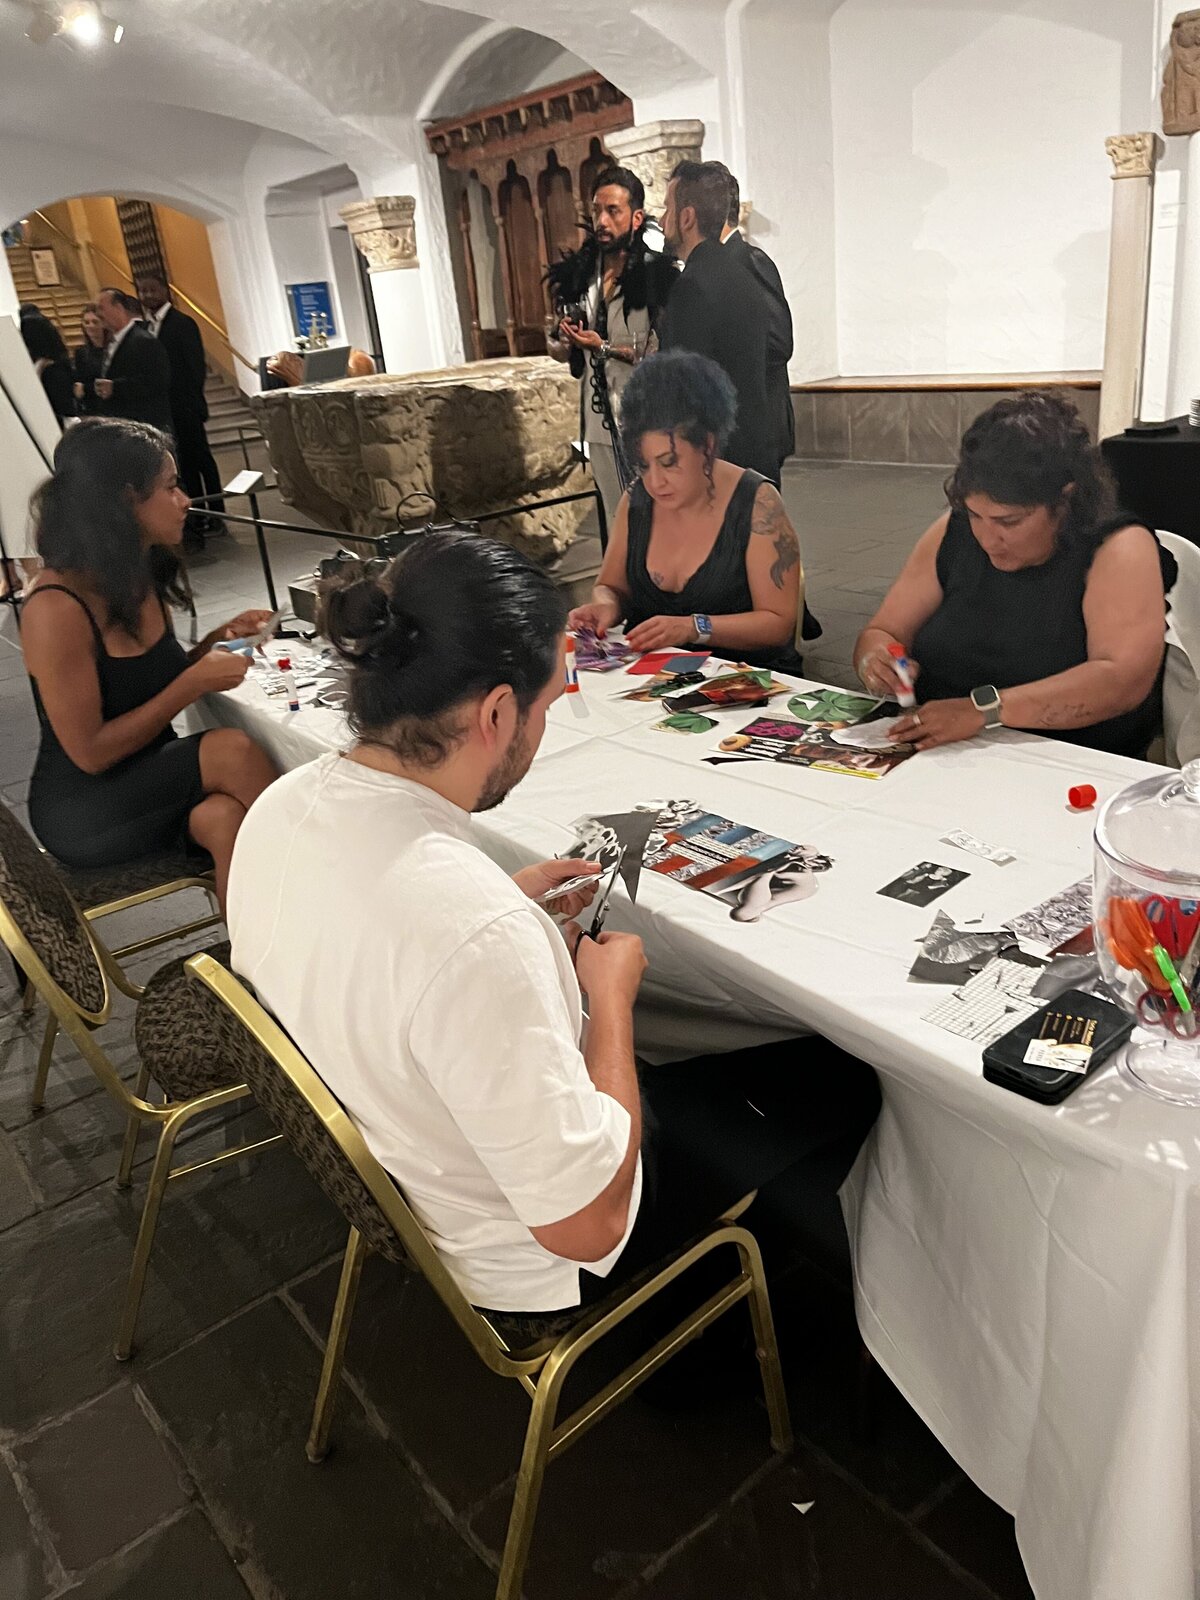 People sitting at a table working on their collage - cutting images, gluing, and arranging